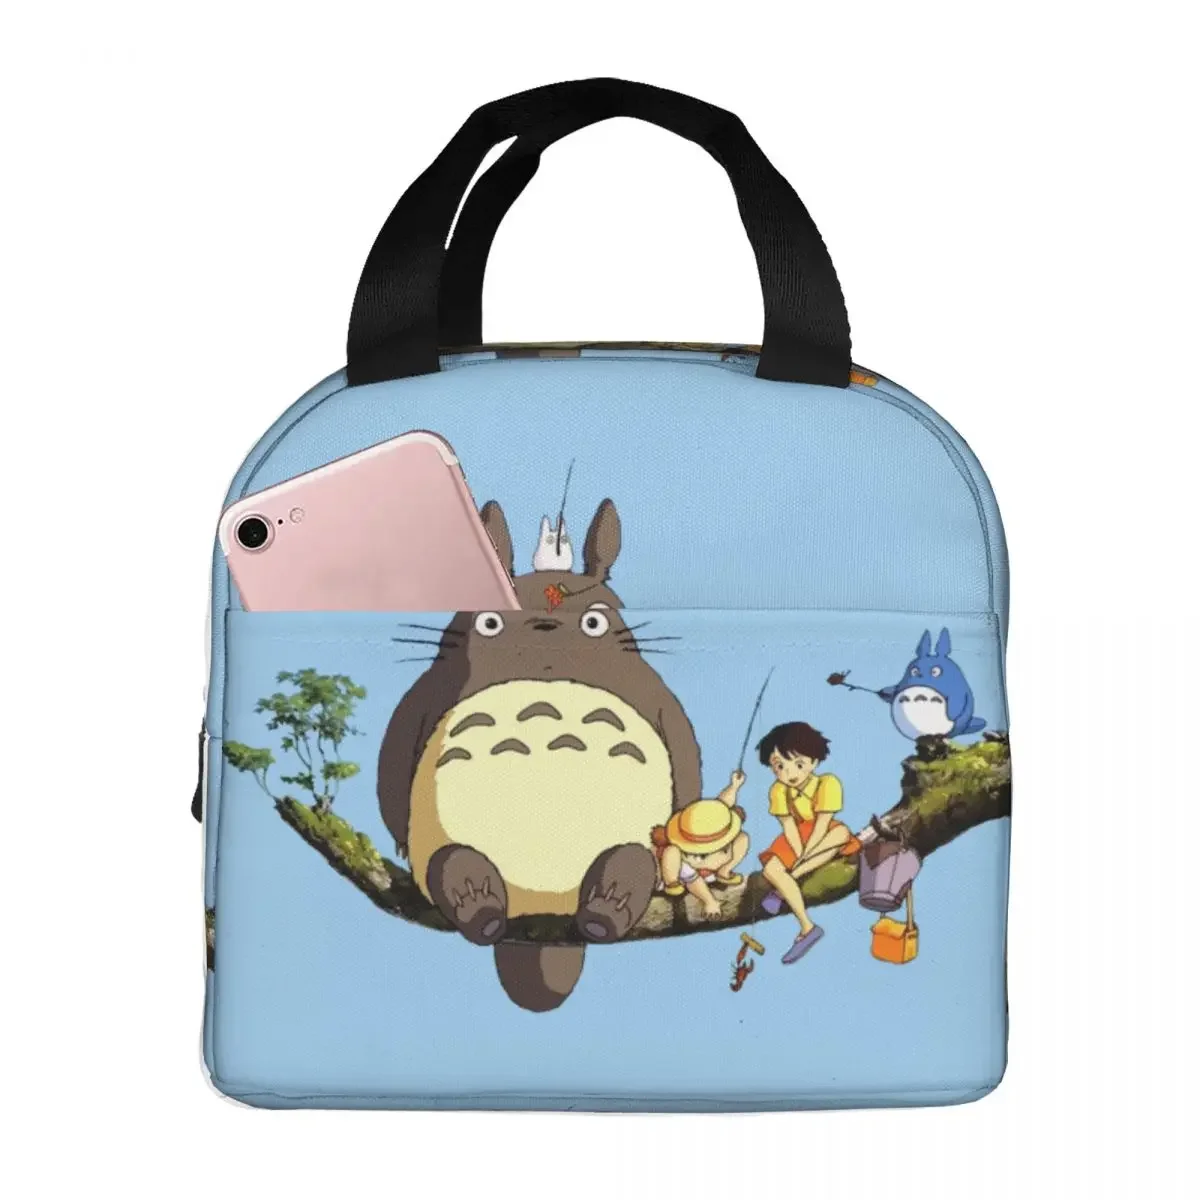 

My Neighbor Totoro Lunch Bags Portable Insulated Cooler Bags Studio Ghibli Thermal Cold Food Picnic Tote for Women Children